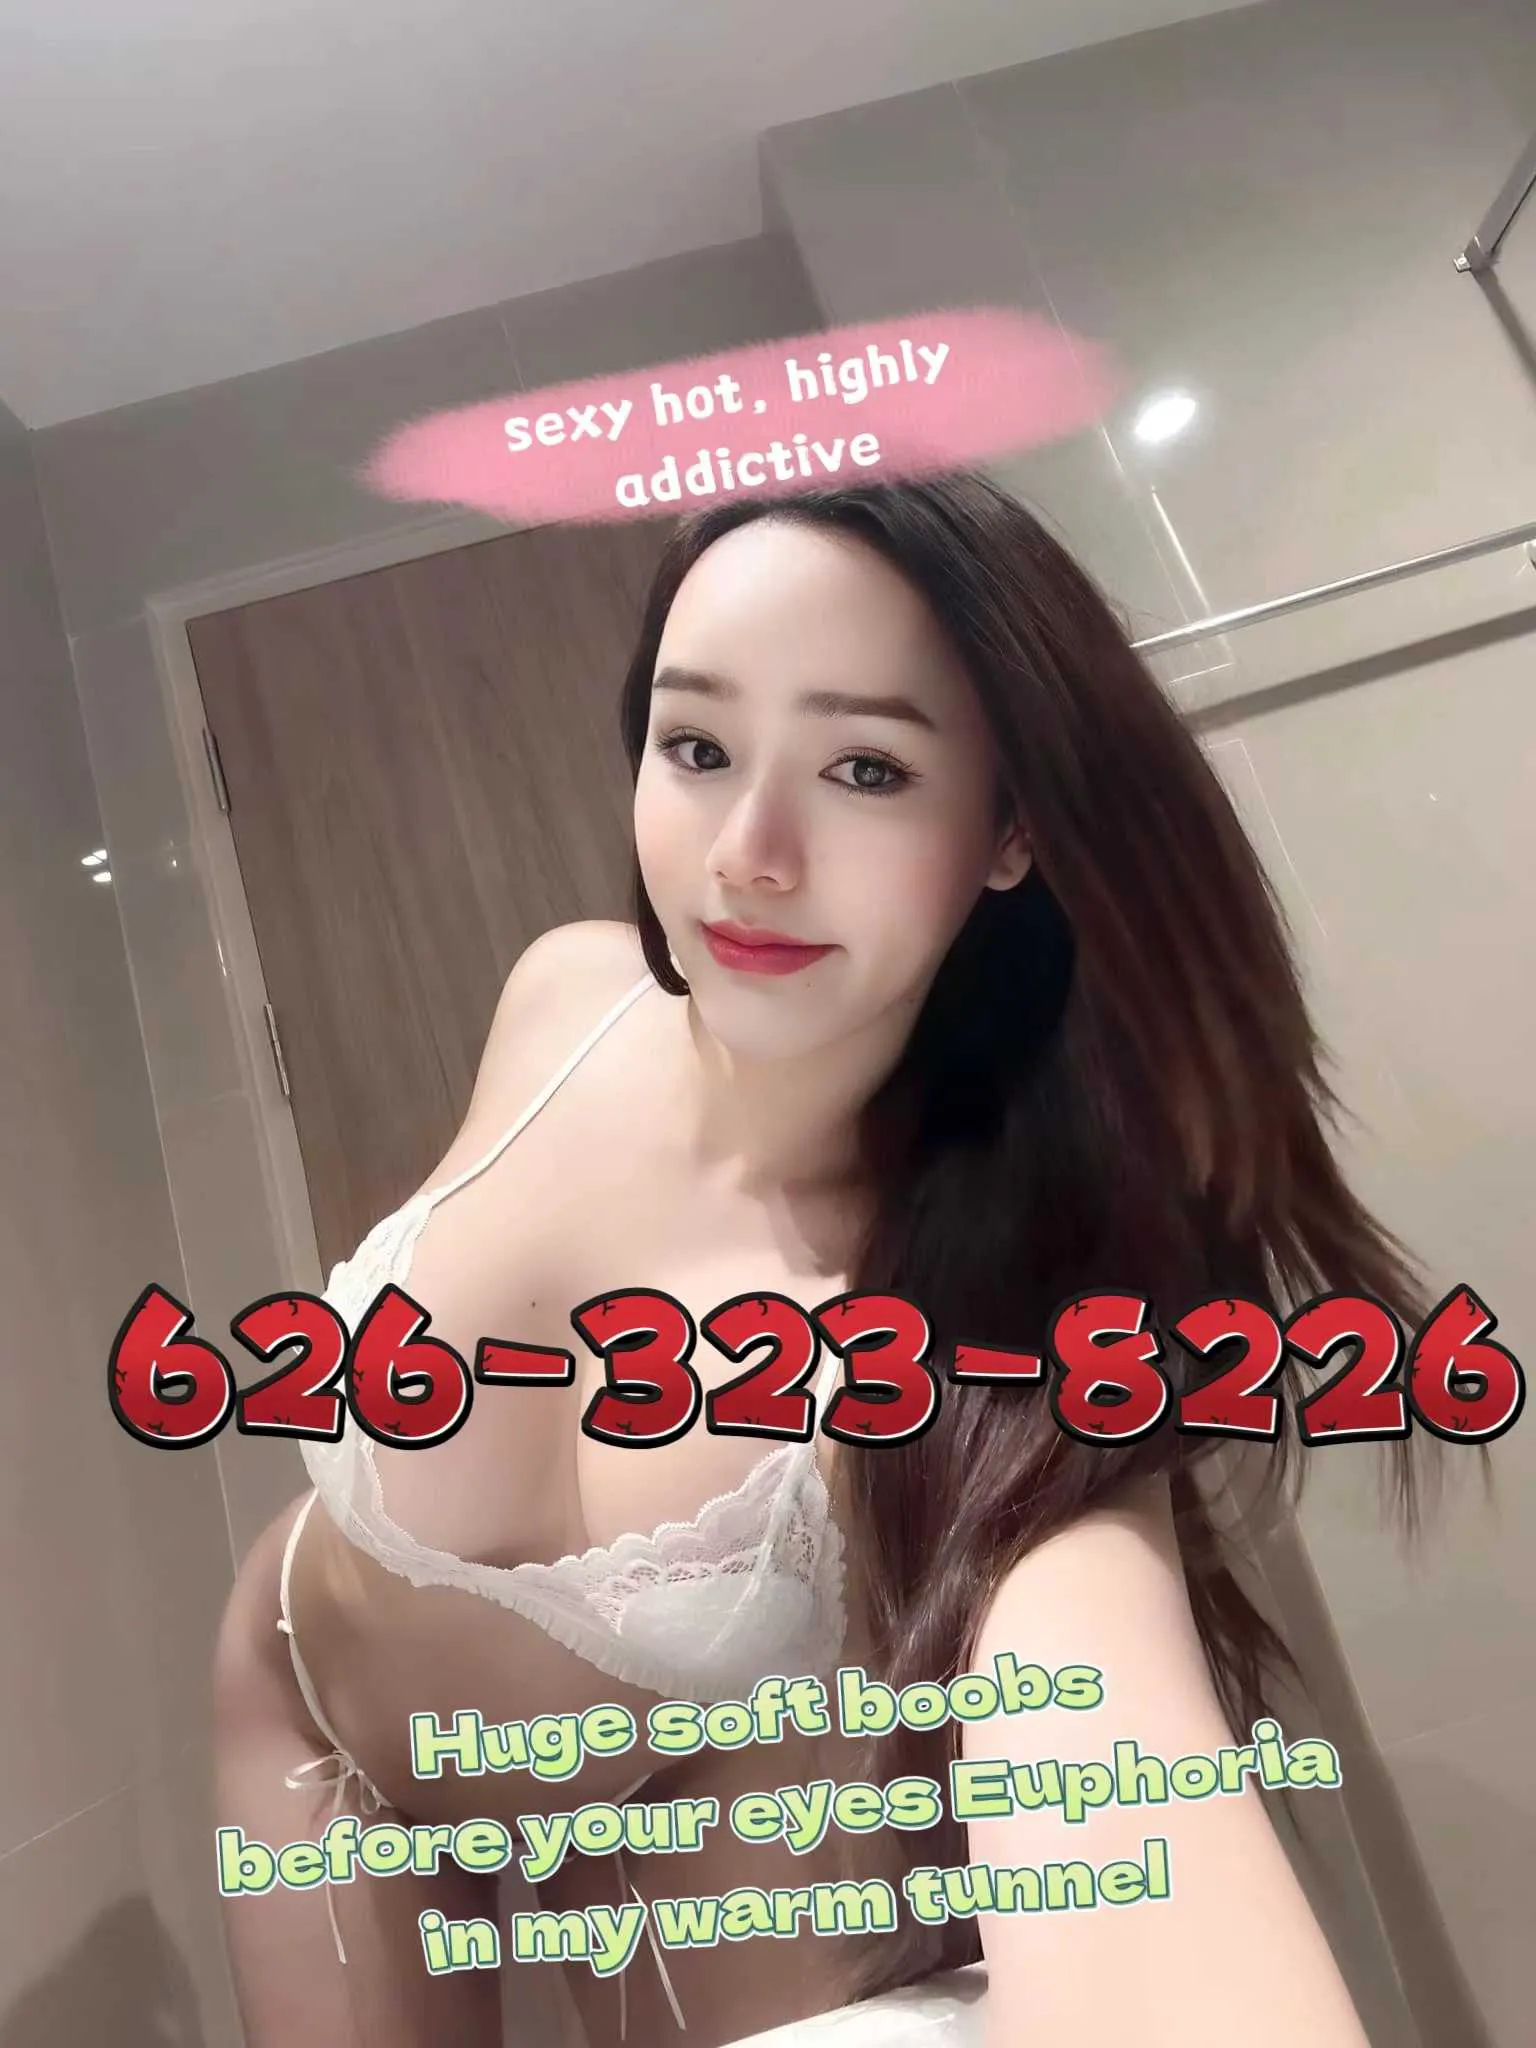 Reviews about escort with phone number 6263238226